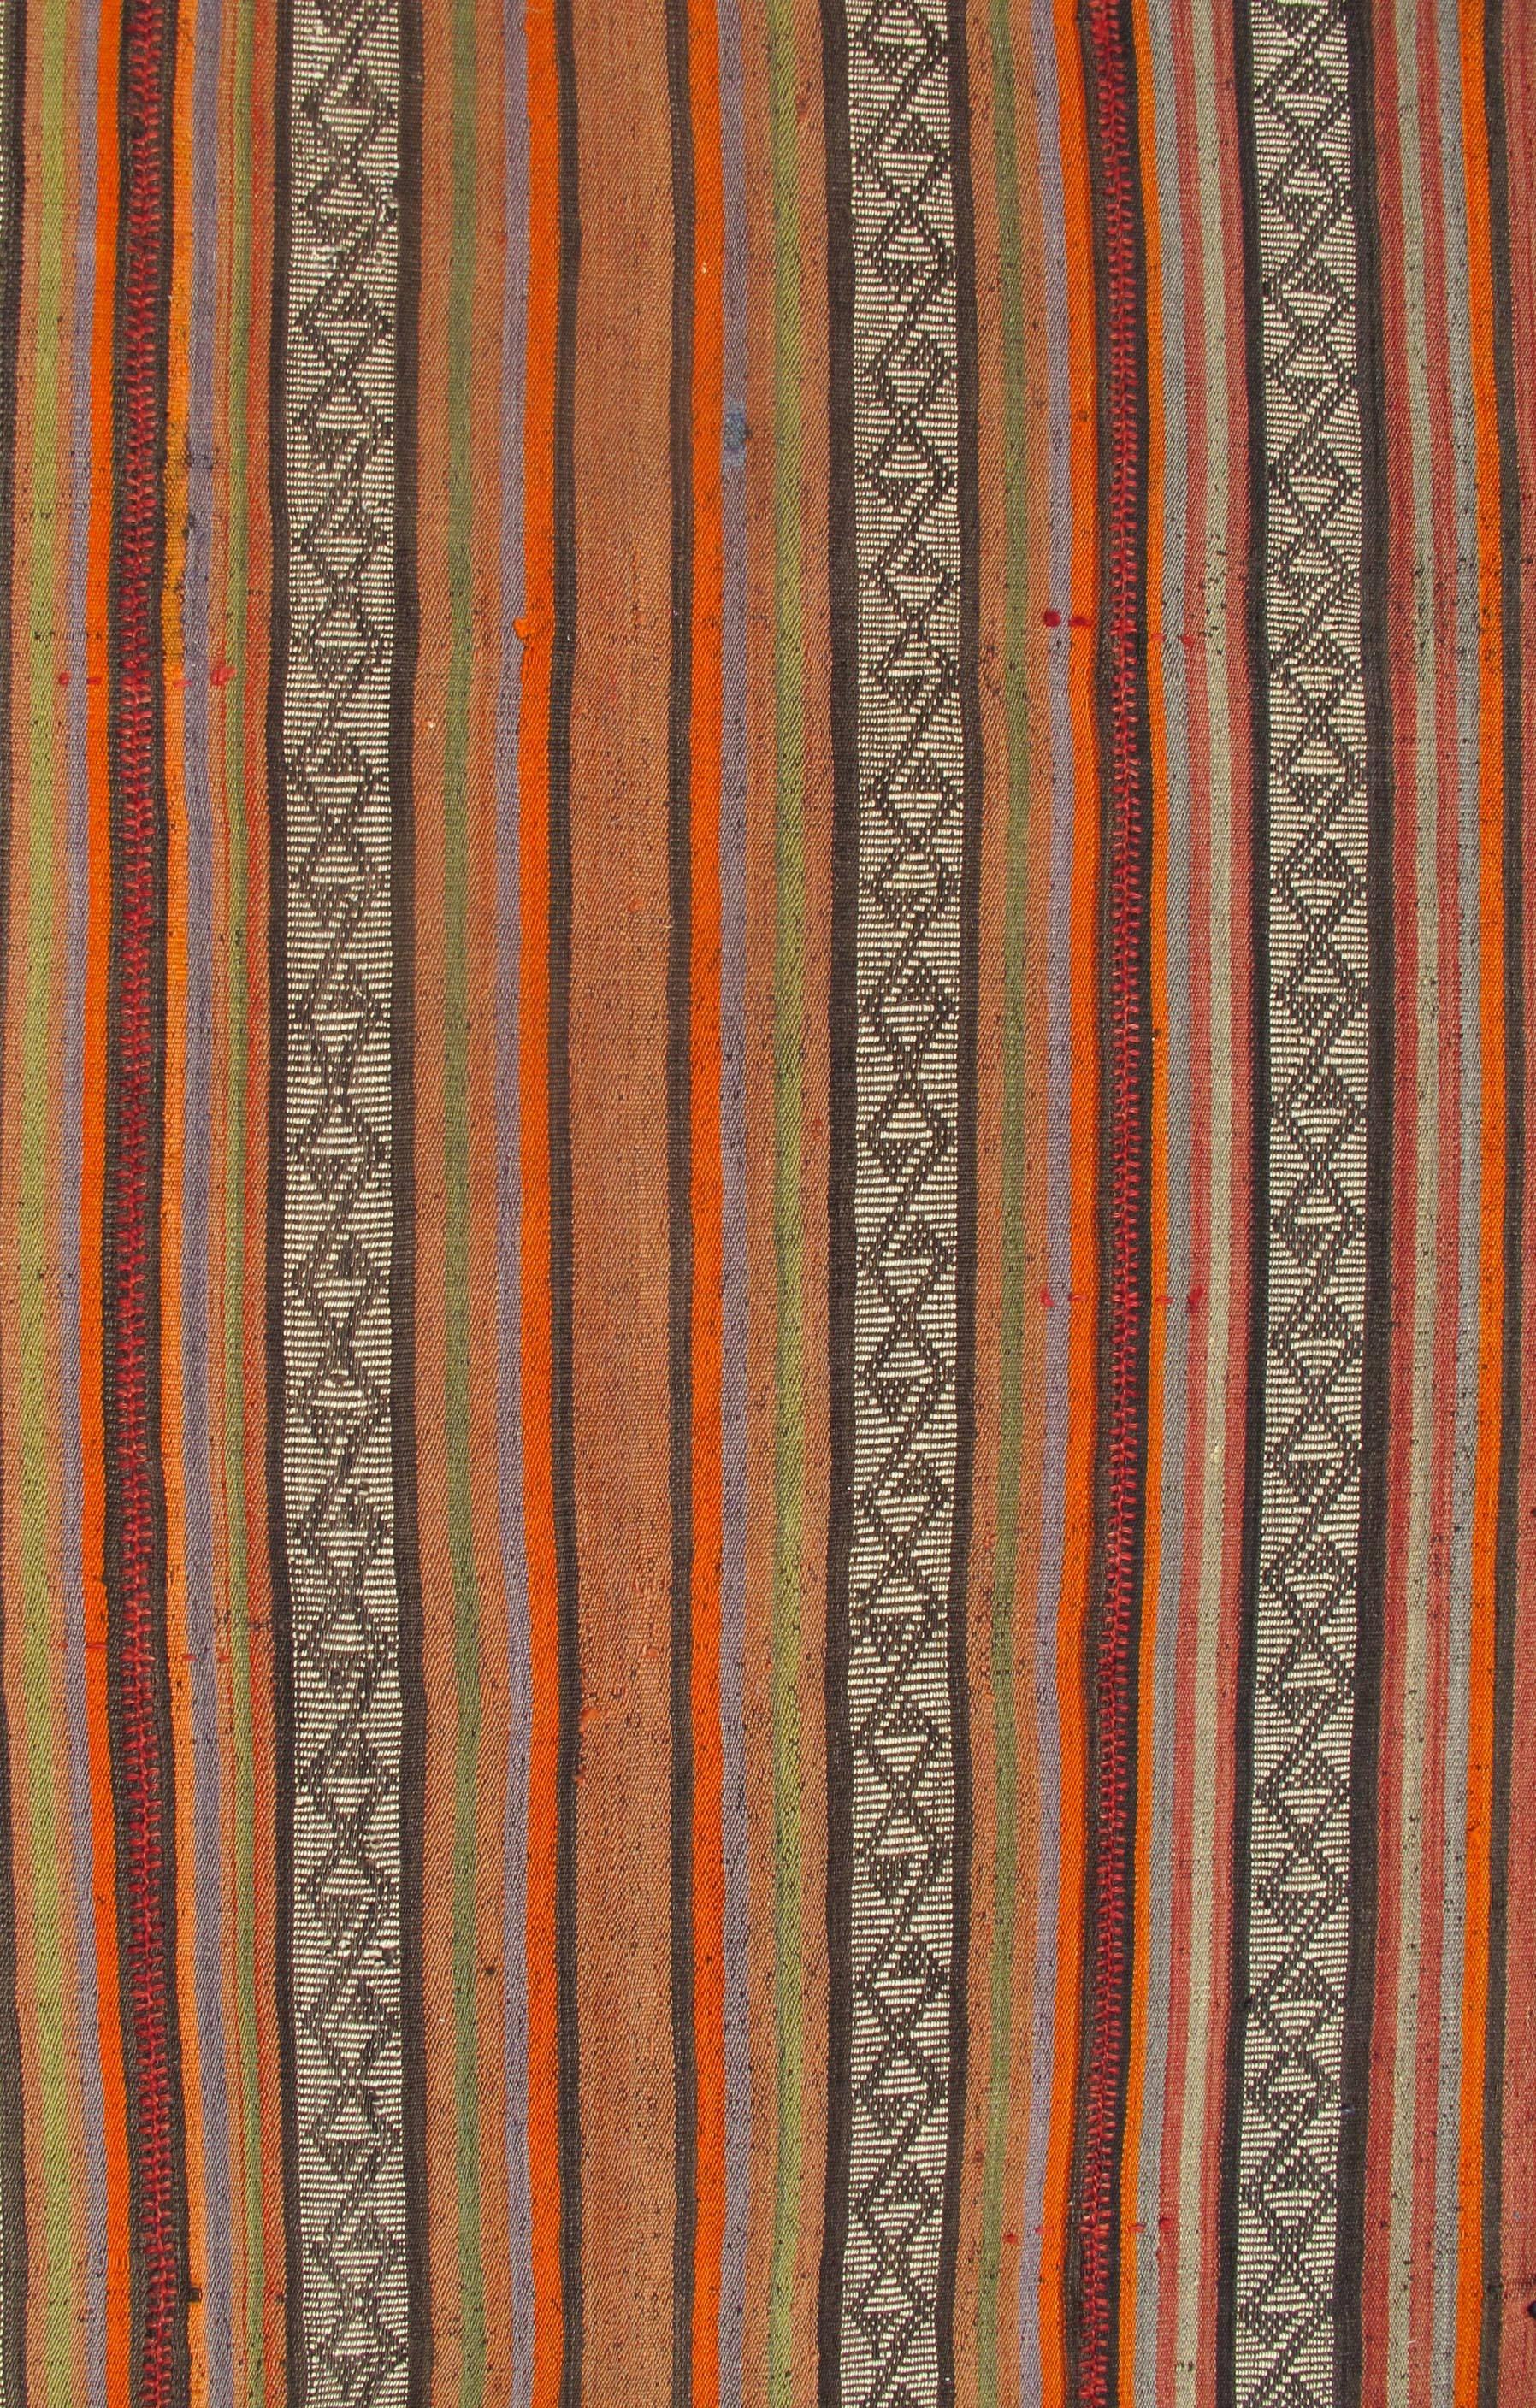 Colorful long Turkish Kilim Runner with vertical stripe and geometric pattern, rug ned-136027, country of origin / type: Turkey / Kilim, circa mid-20th century.

Woven during the mid-20th century in Turkey, this designer Kilim is decorated with a